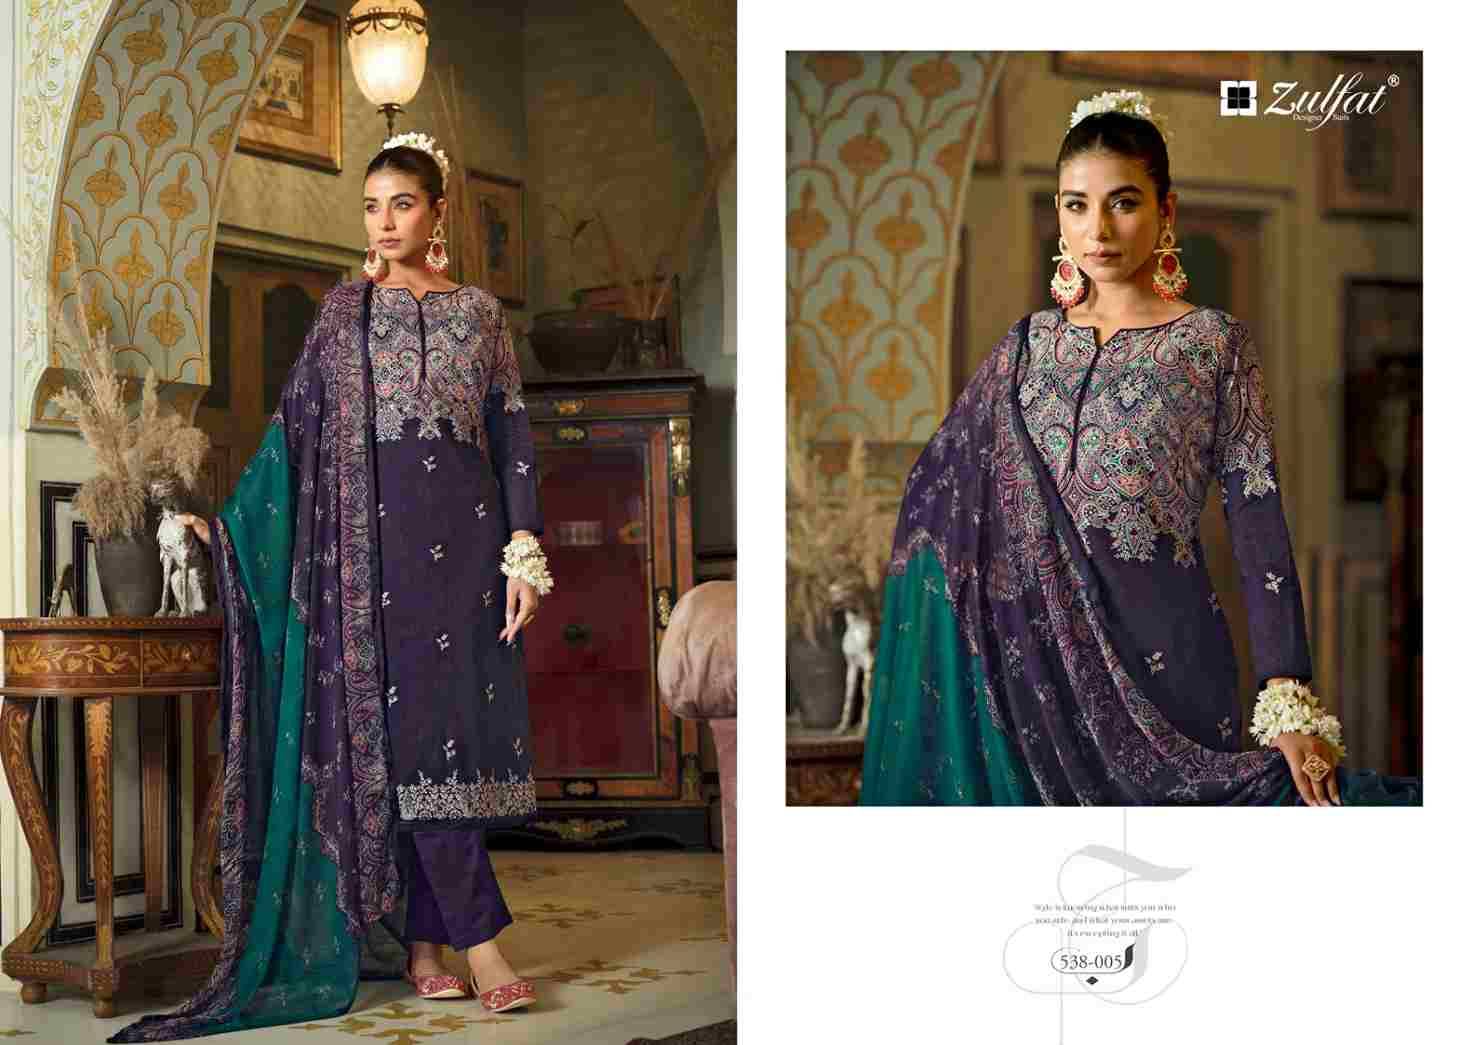 Dilruba Vol-2 By Zulfat 538-001 To 538-008 Series Beautiful Festive Suits Stylish Fancy Colorful Casual Wear & Ethnic Wear Pure Cotton Print Dresses At Wholesale Price